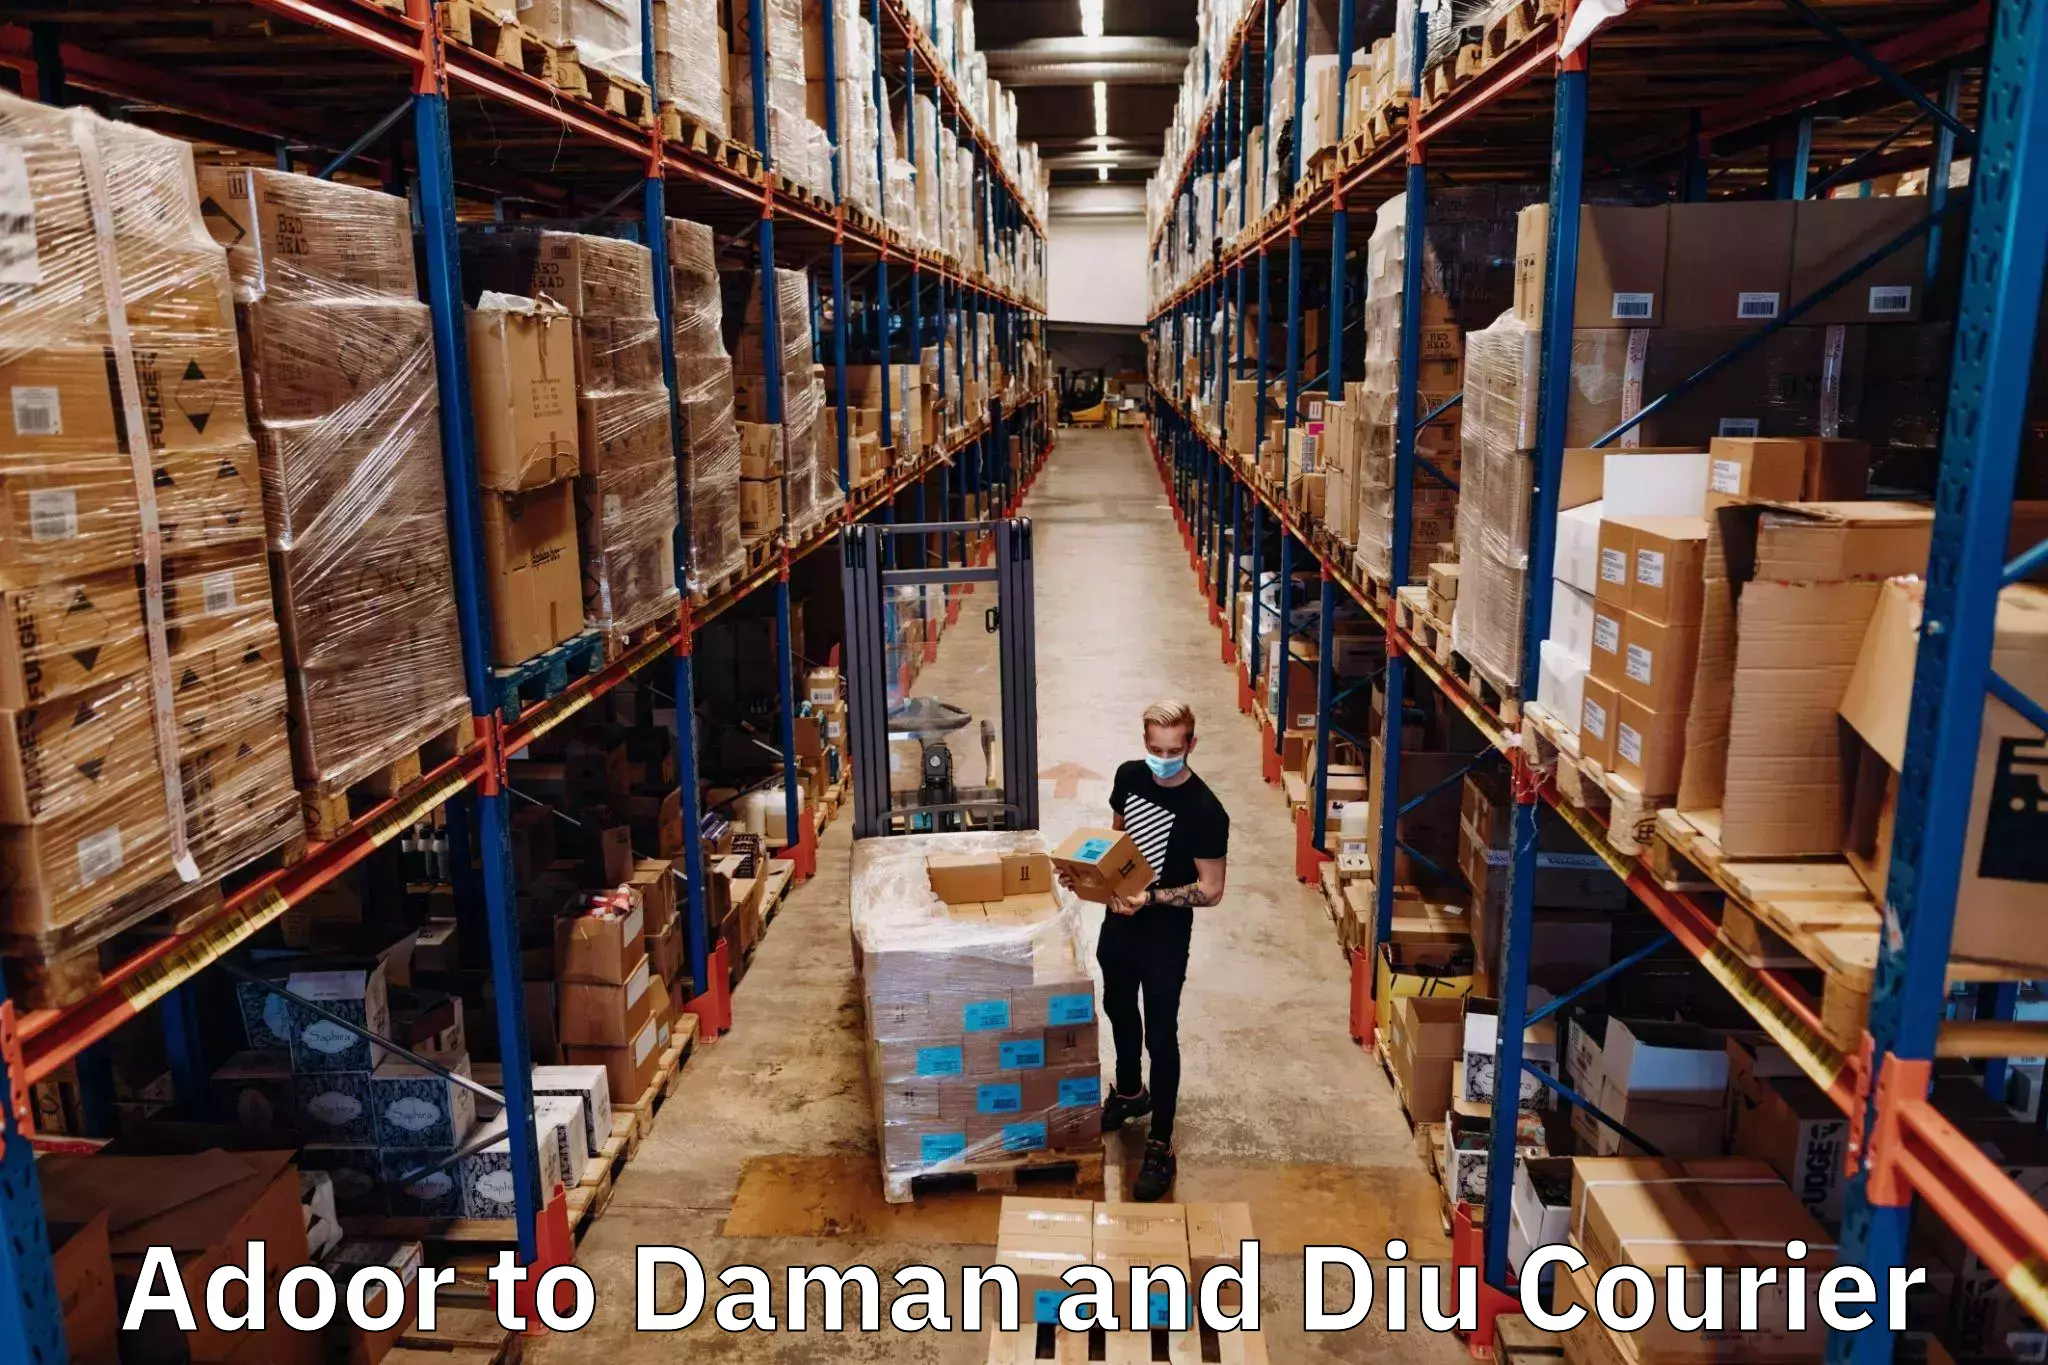 Modern courier technology Adoor to Daman and Diu